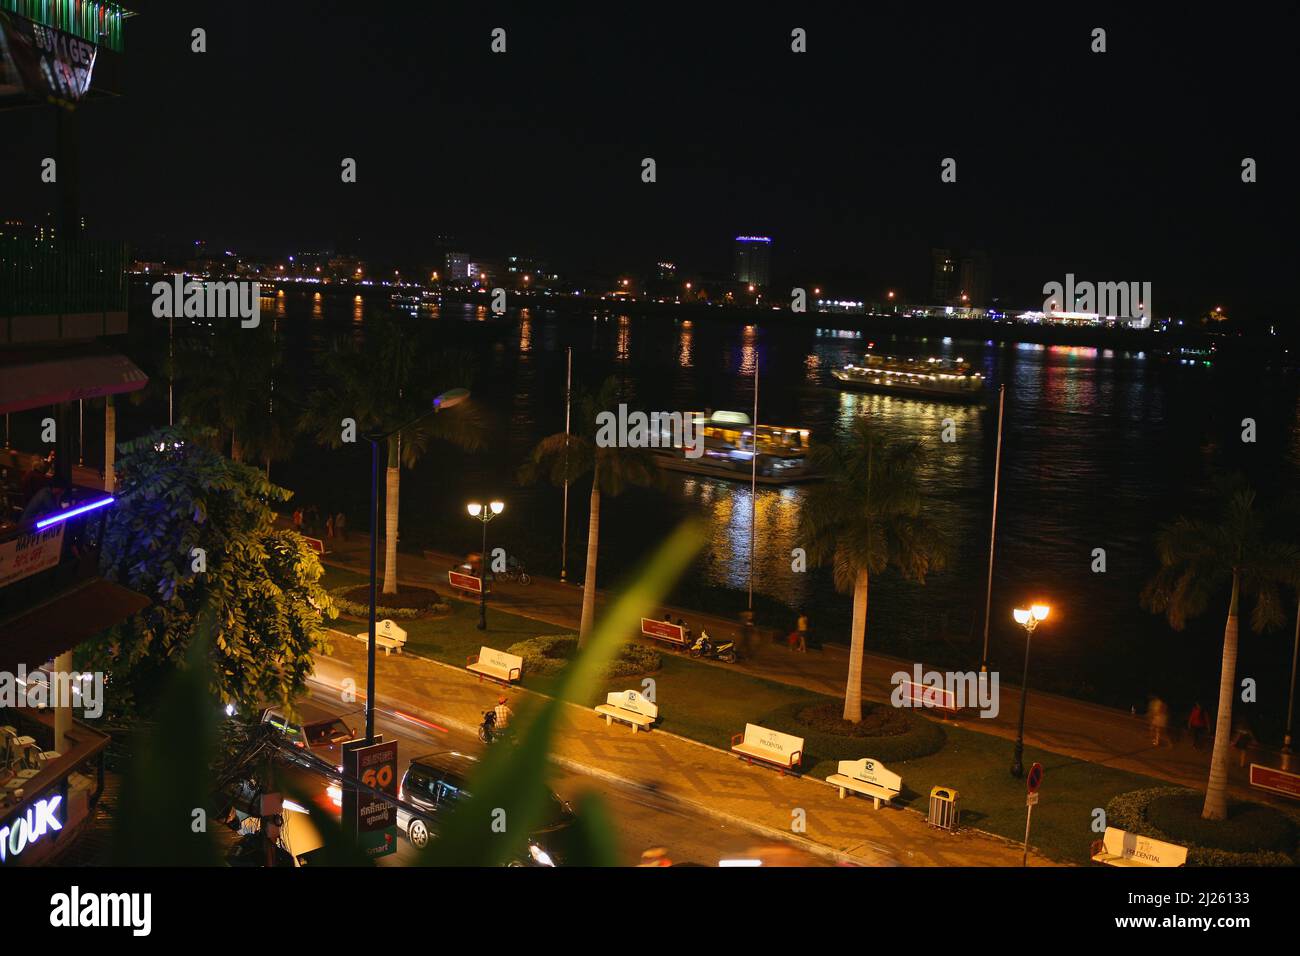 Tonlé Sap River from the roof bar of the FCC (Foreign Correspondent Club), Phnom Penh, Cambodia, at night Stock Photo